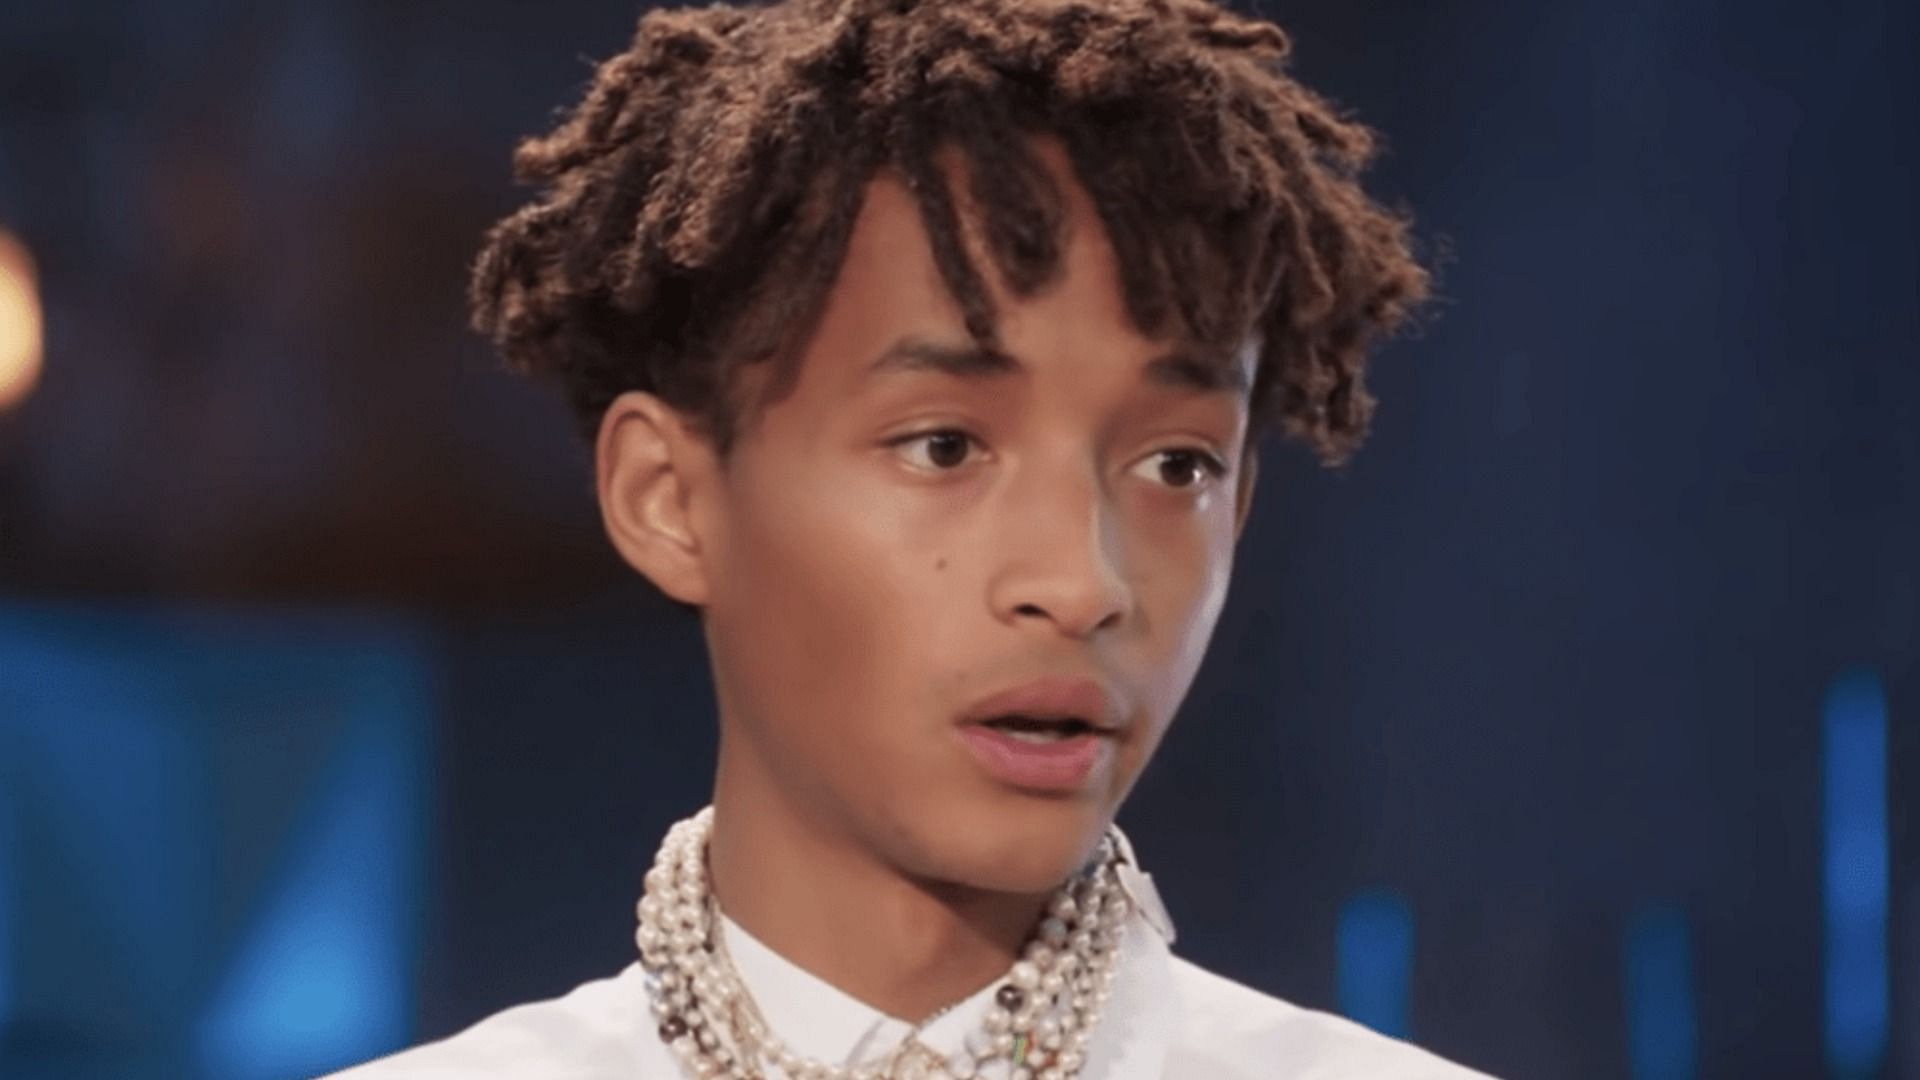 Hilarious Jaden Smith Interview Memes Take Over Twitter As Resurfaced Clip Of Actor Talking About Other Kids Goes Viral